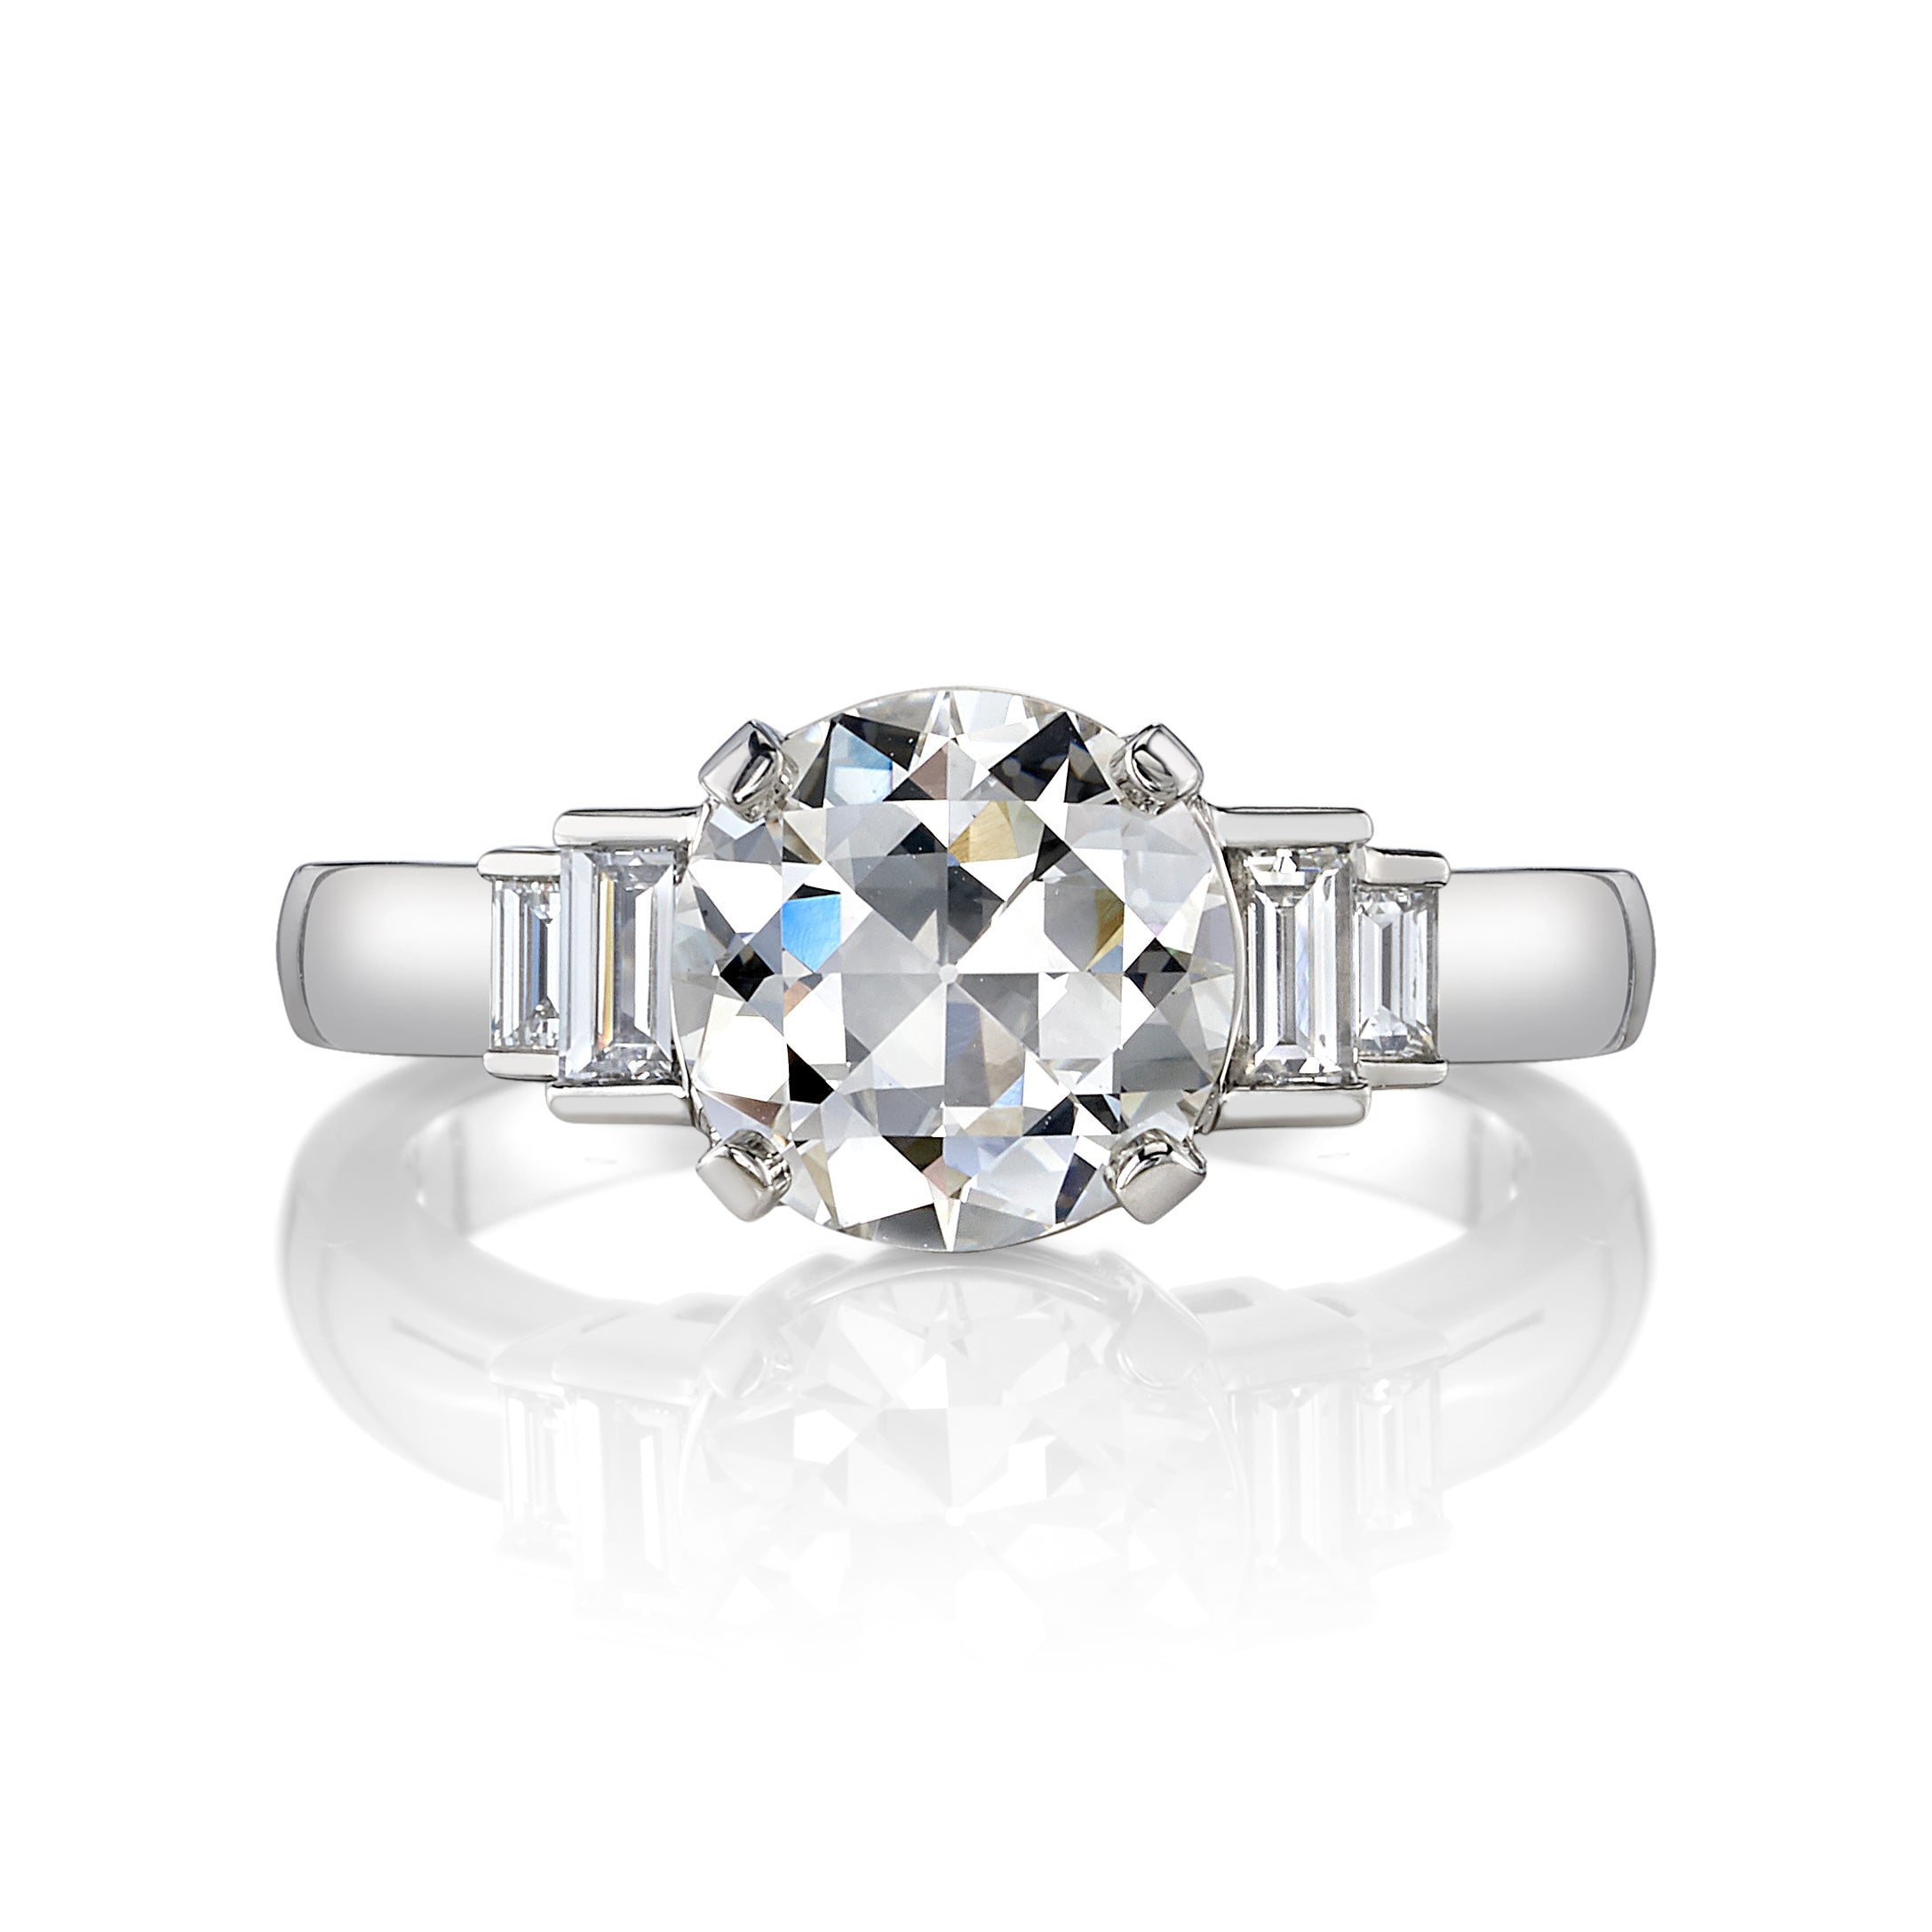 SINGLE STONE SCOUT RING featuring 2.03ct H/VVS2 GIA certified old European cut diamond with 0.31ctw baguette cut diamond accents set in a handcrafted platinum mounting.